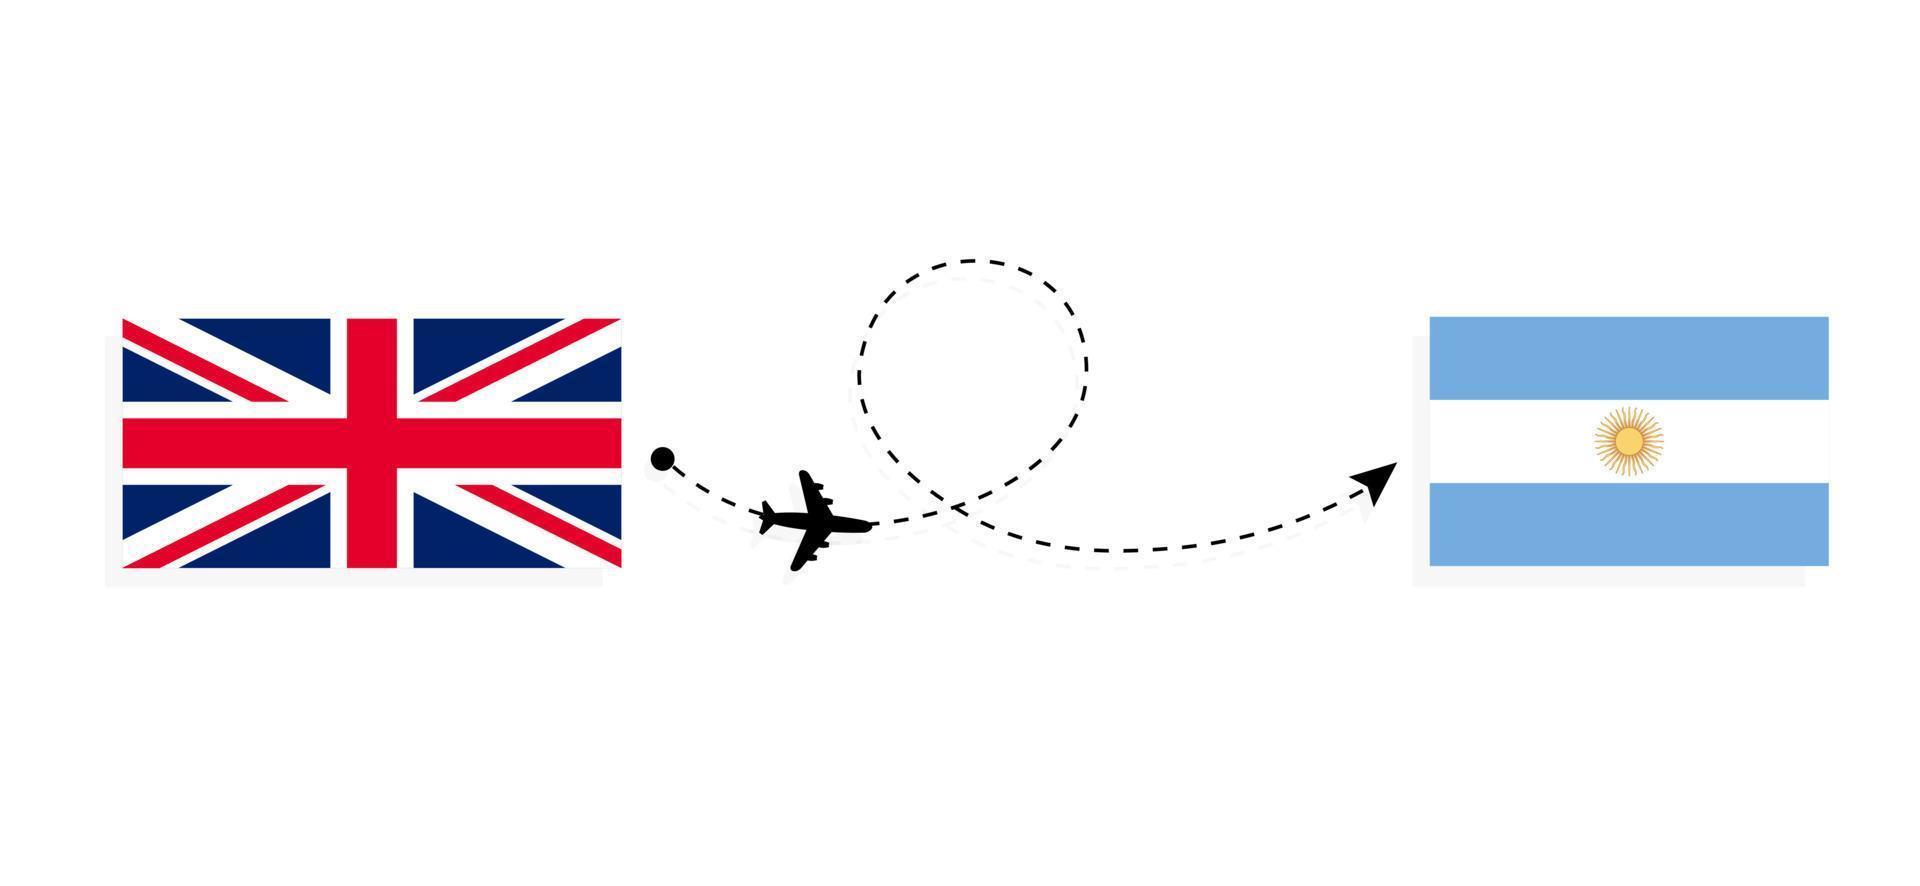 Flight and travel from United Kingdom of Great Britain to Argentina by passenger airplane Travel concept vector